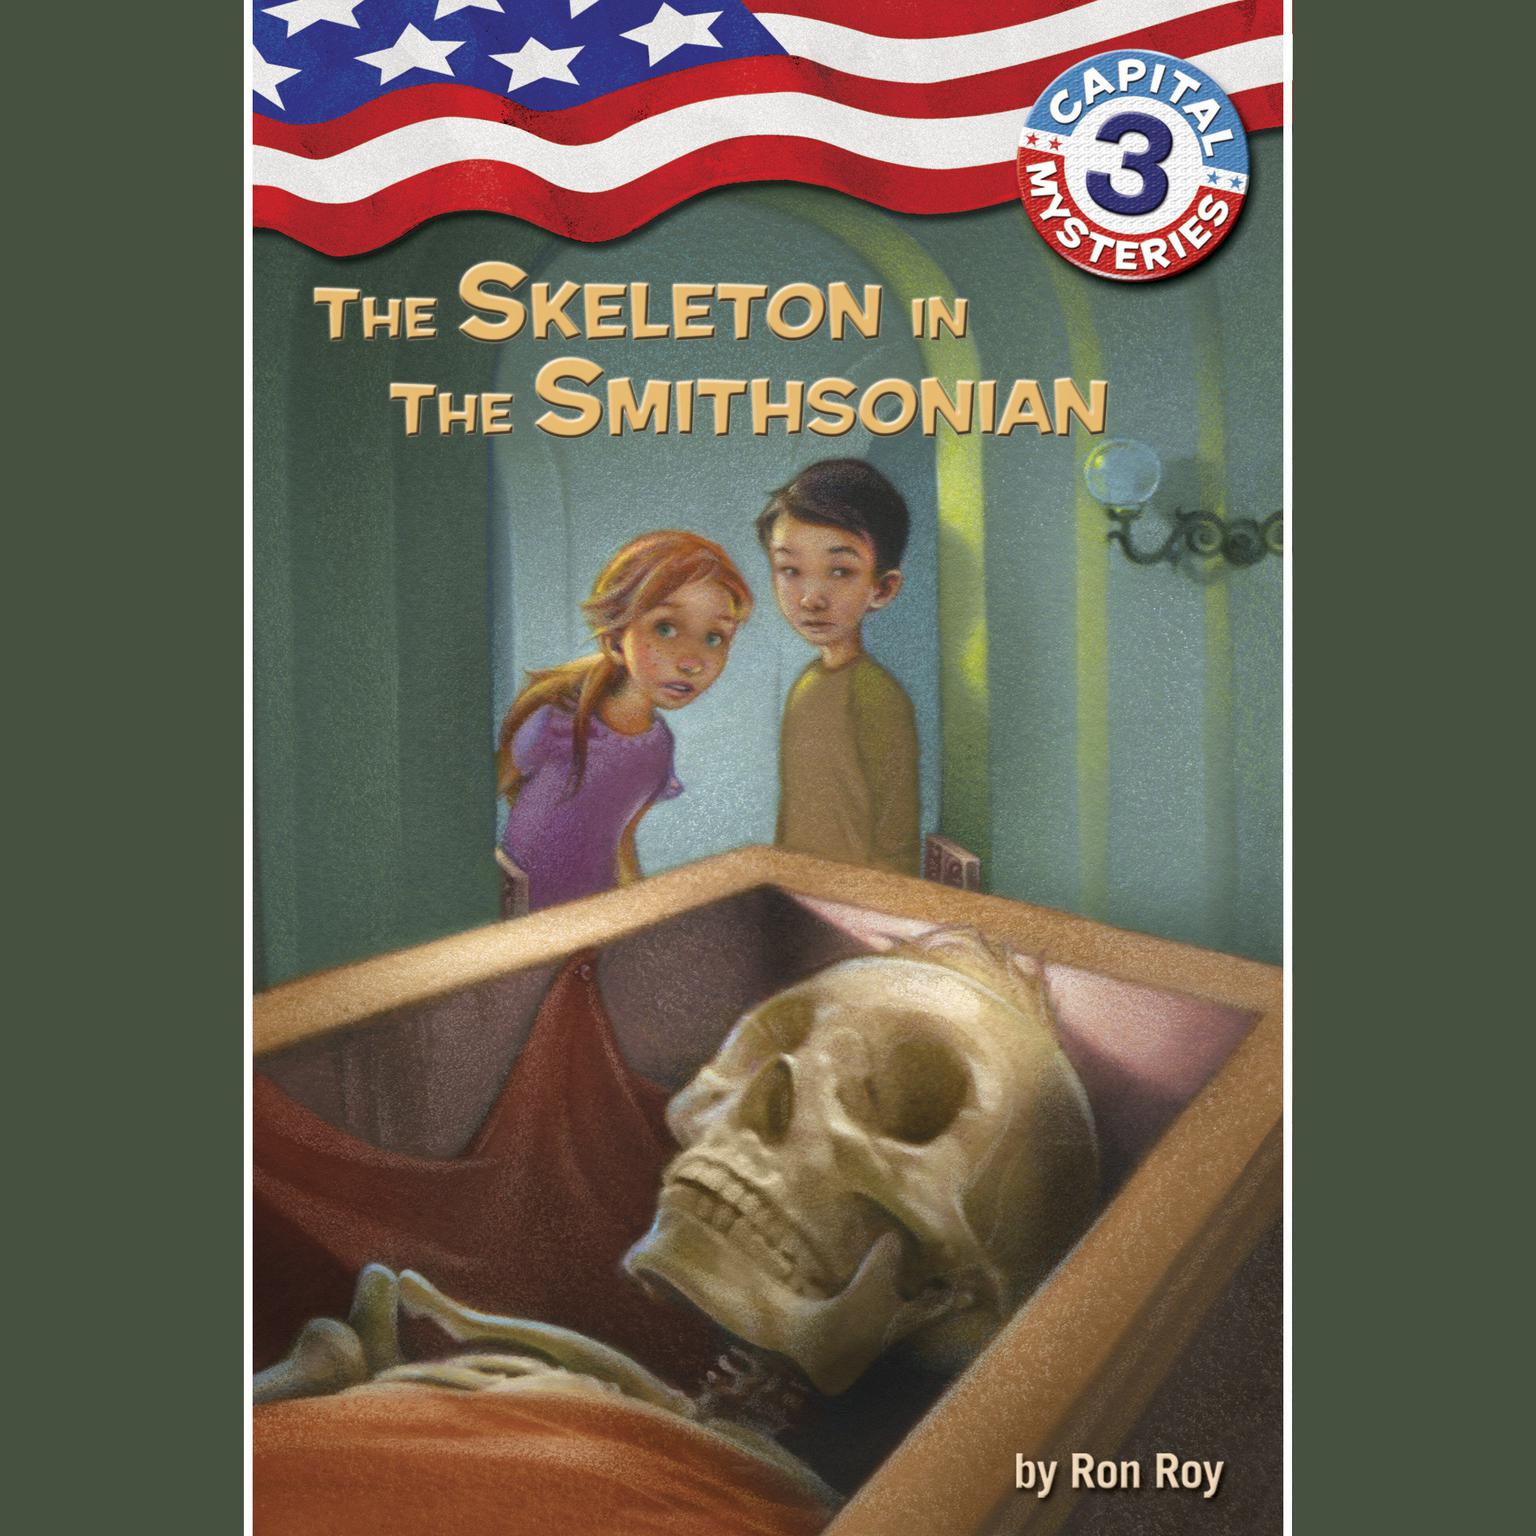 Capital Mysteries #3: The Skeleton in the Smithsonian Audiobook, by Ron Roy